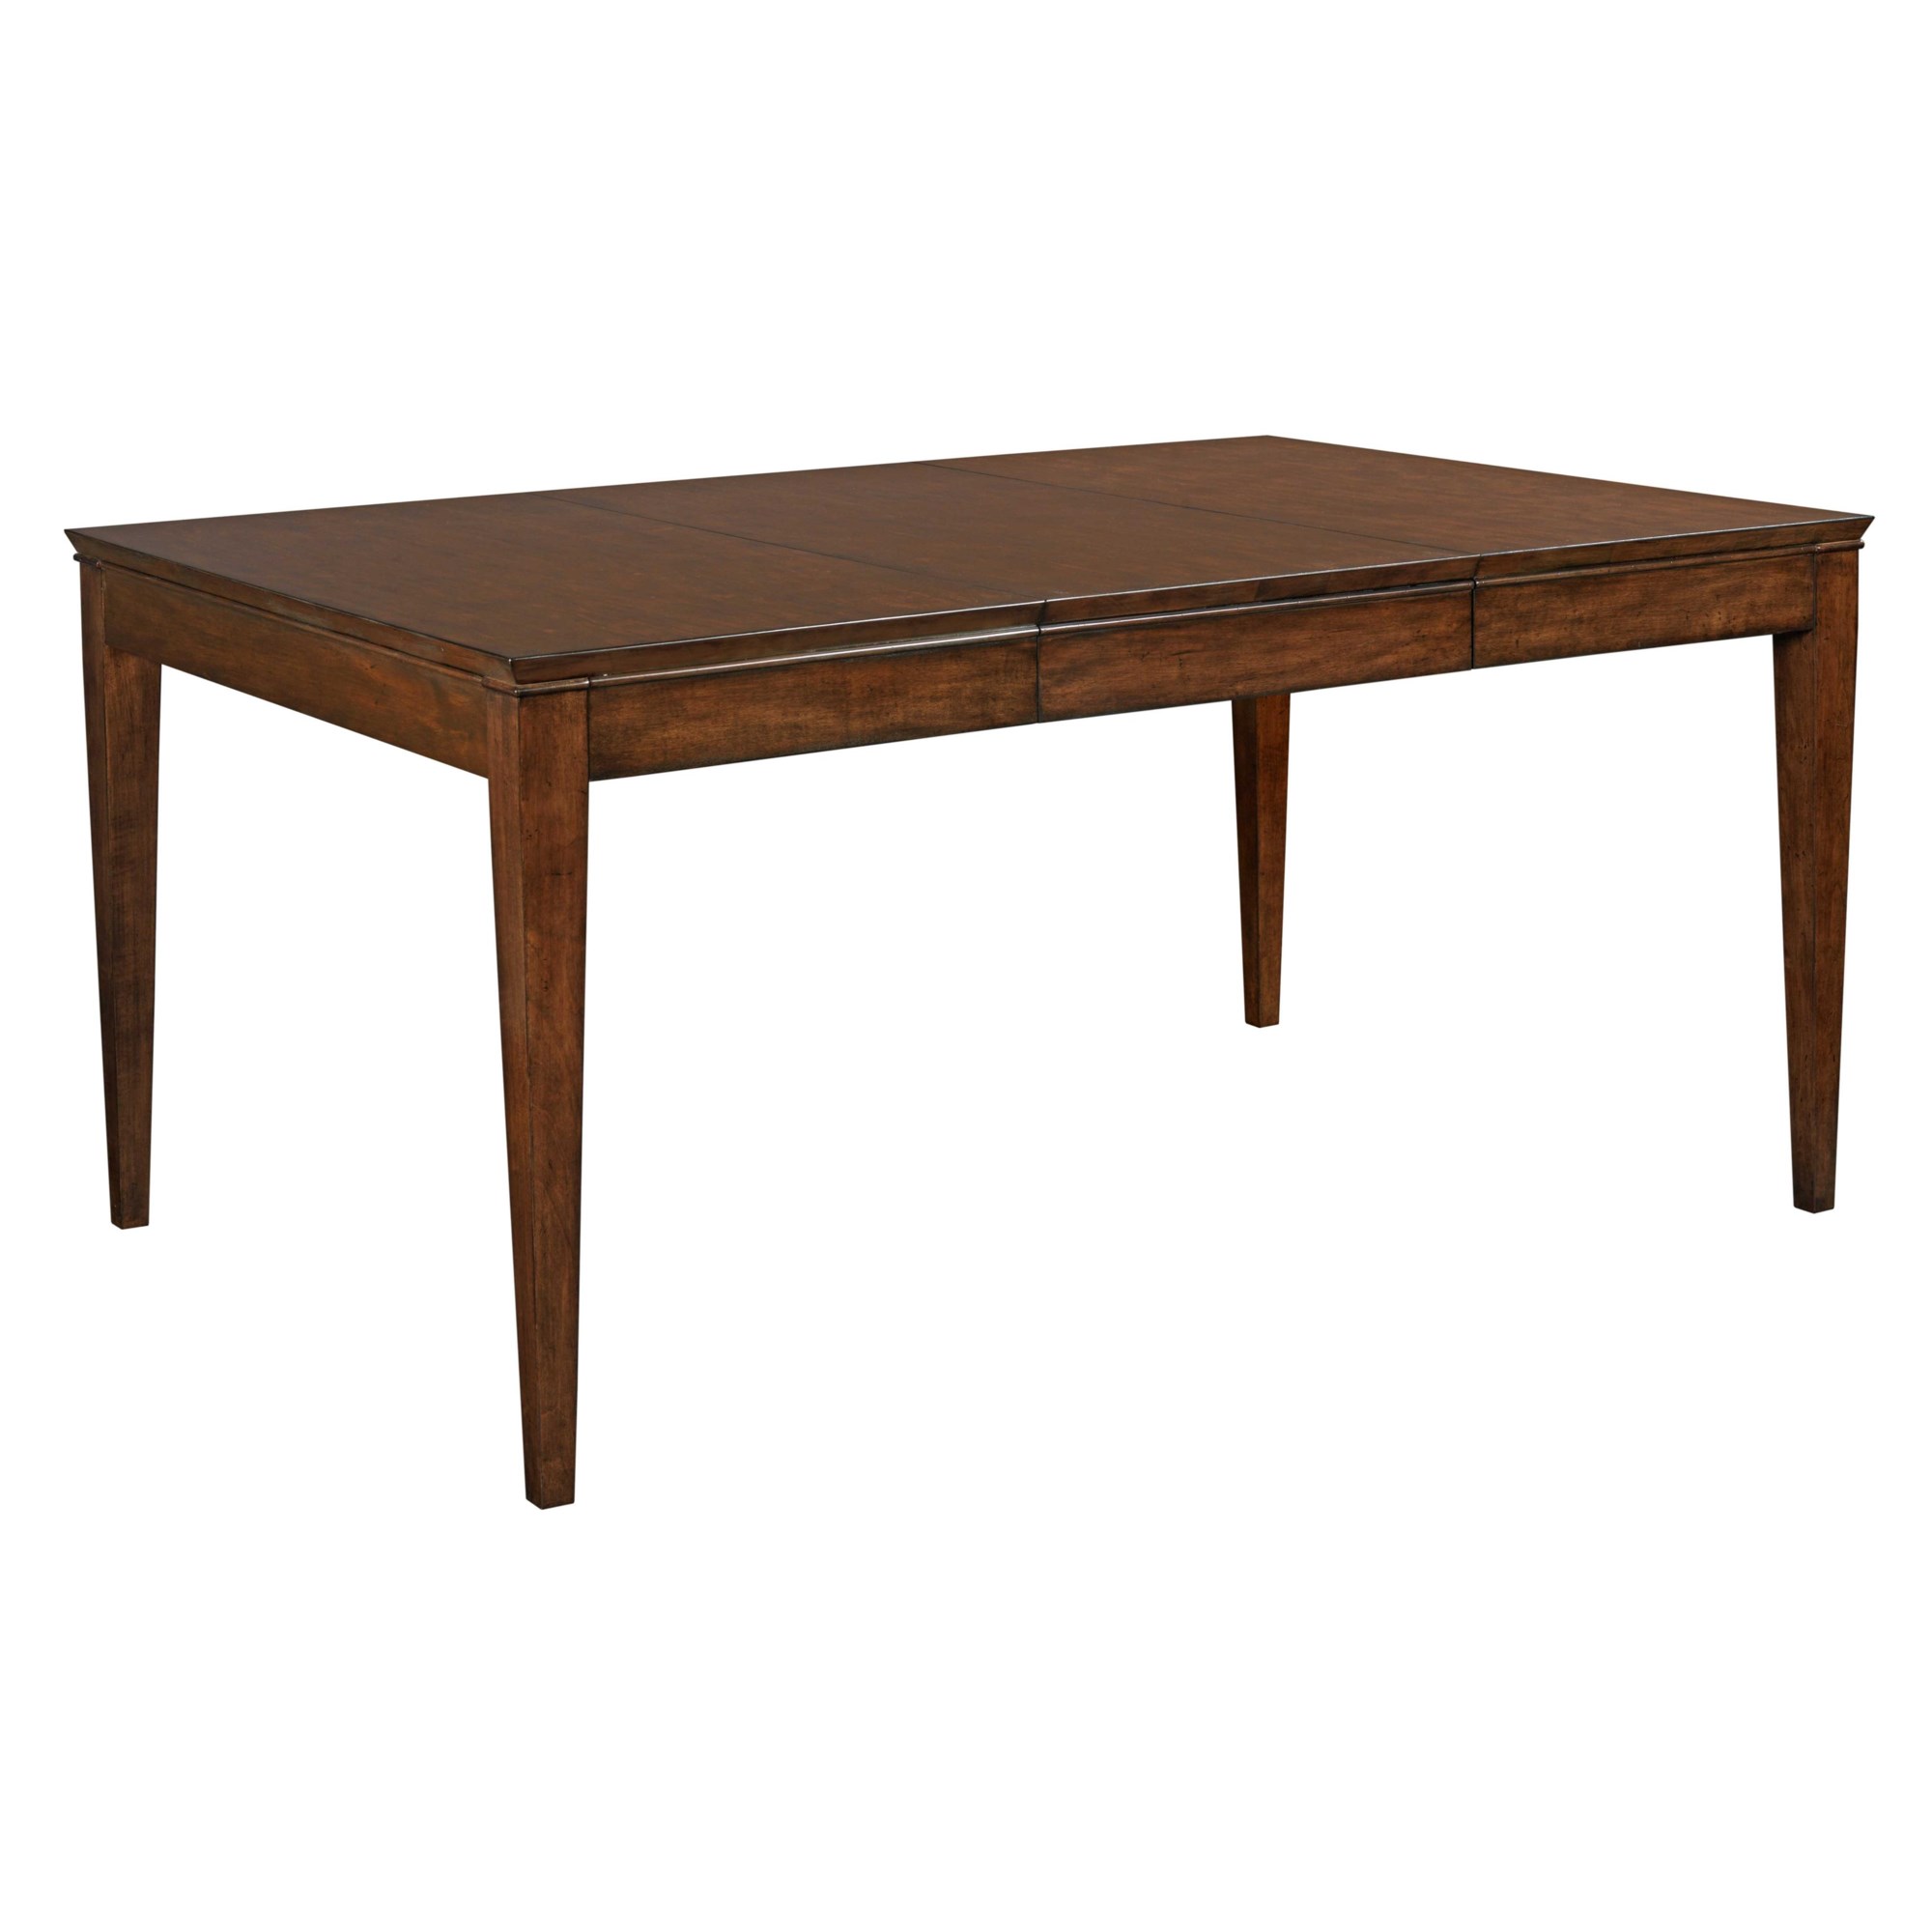 Kincaid Furniture Elise 770541658 Transitional Leg Table with Two Extension  Leaves, Belfort Furniture